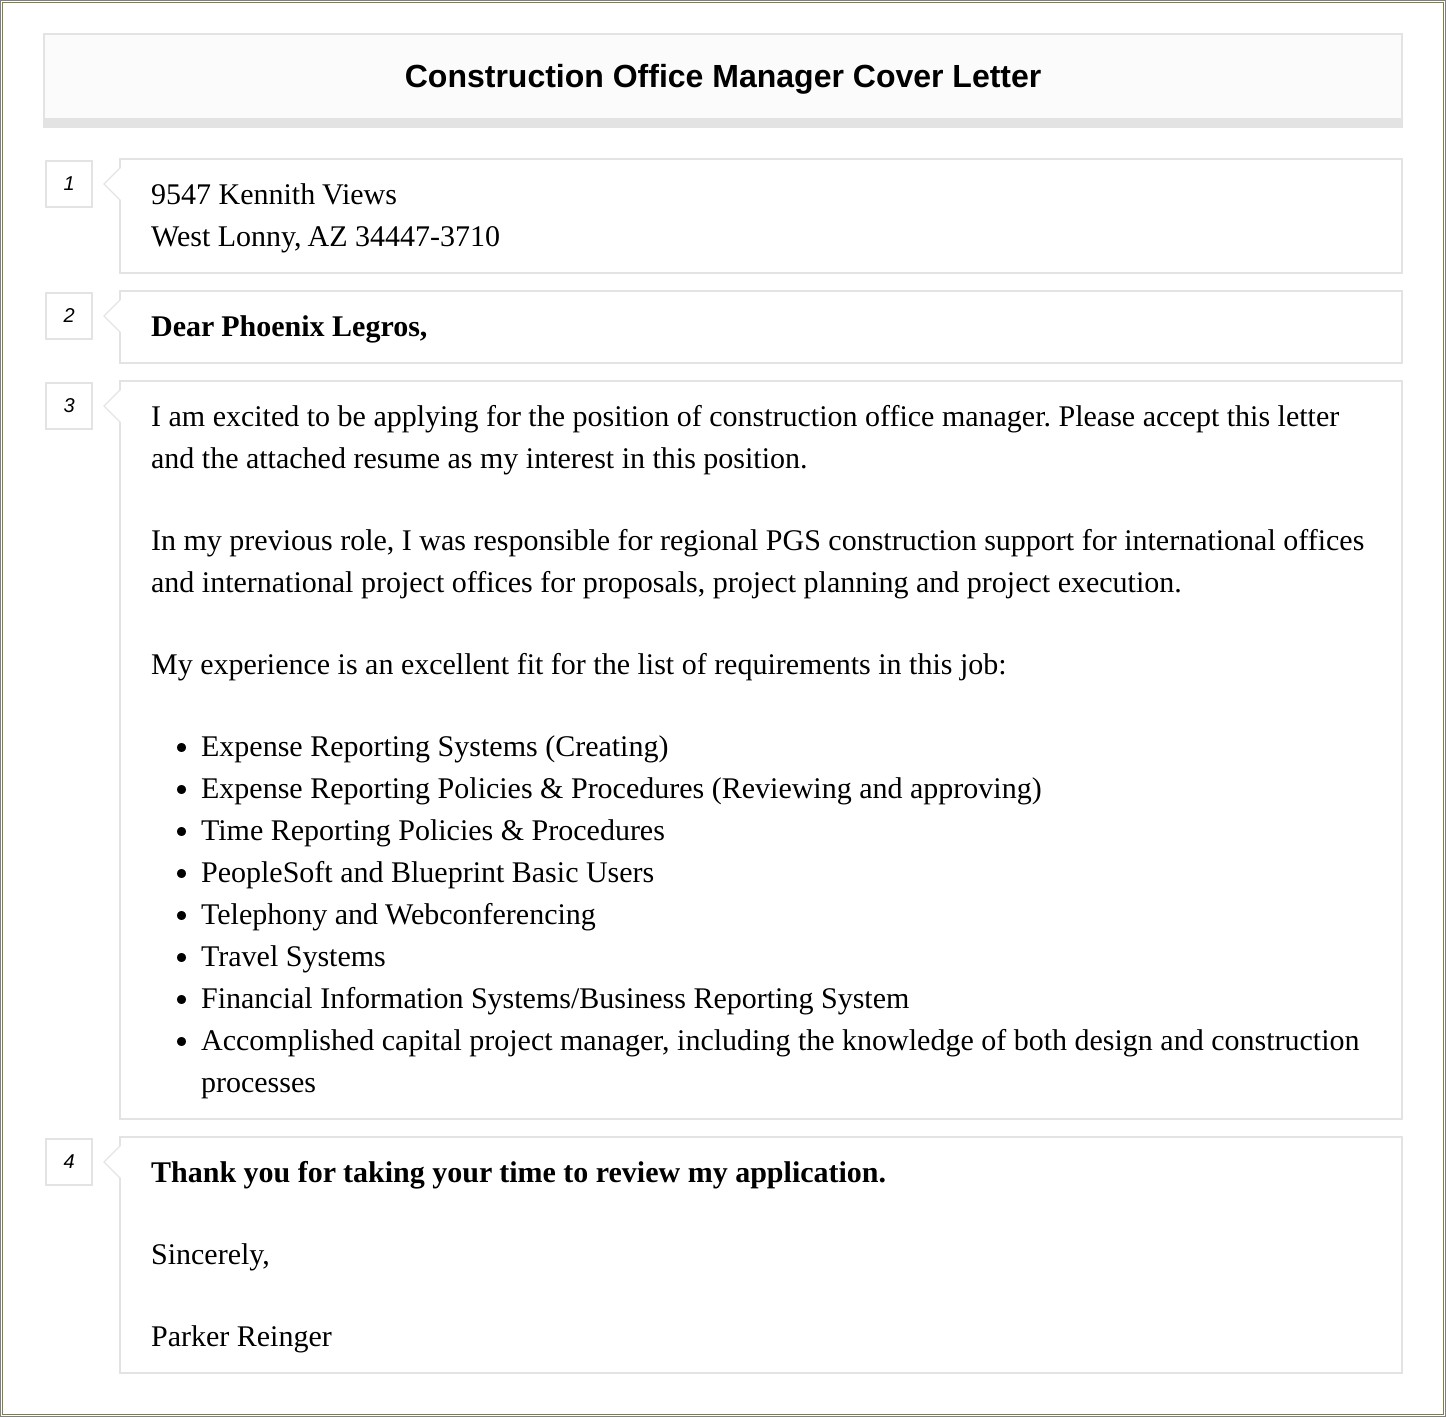 Construction Office Manager Resume Cover Letter